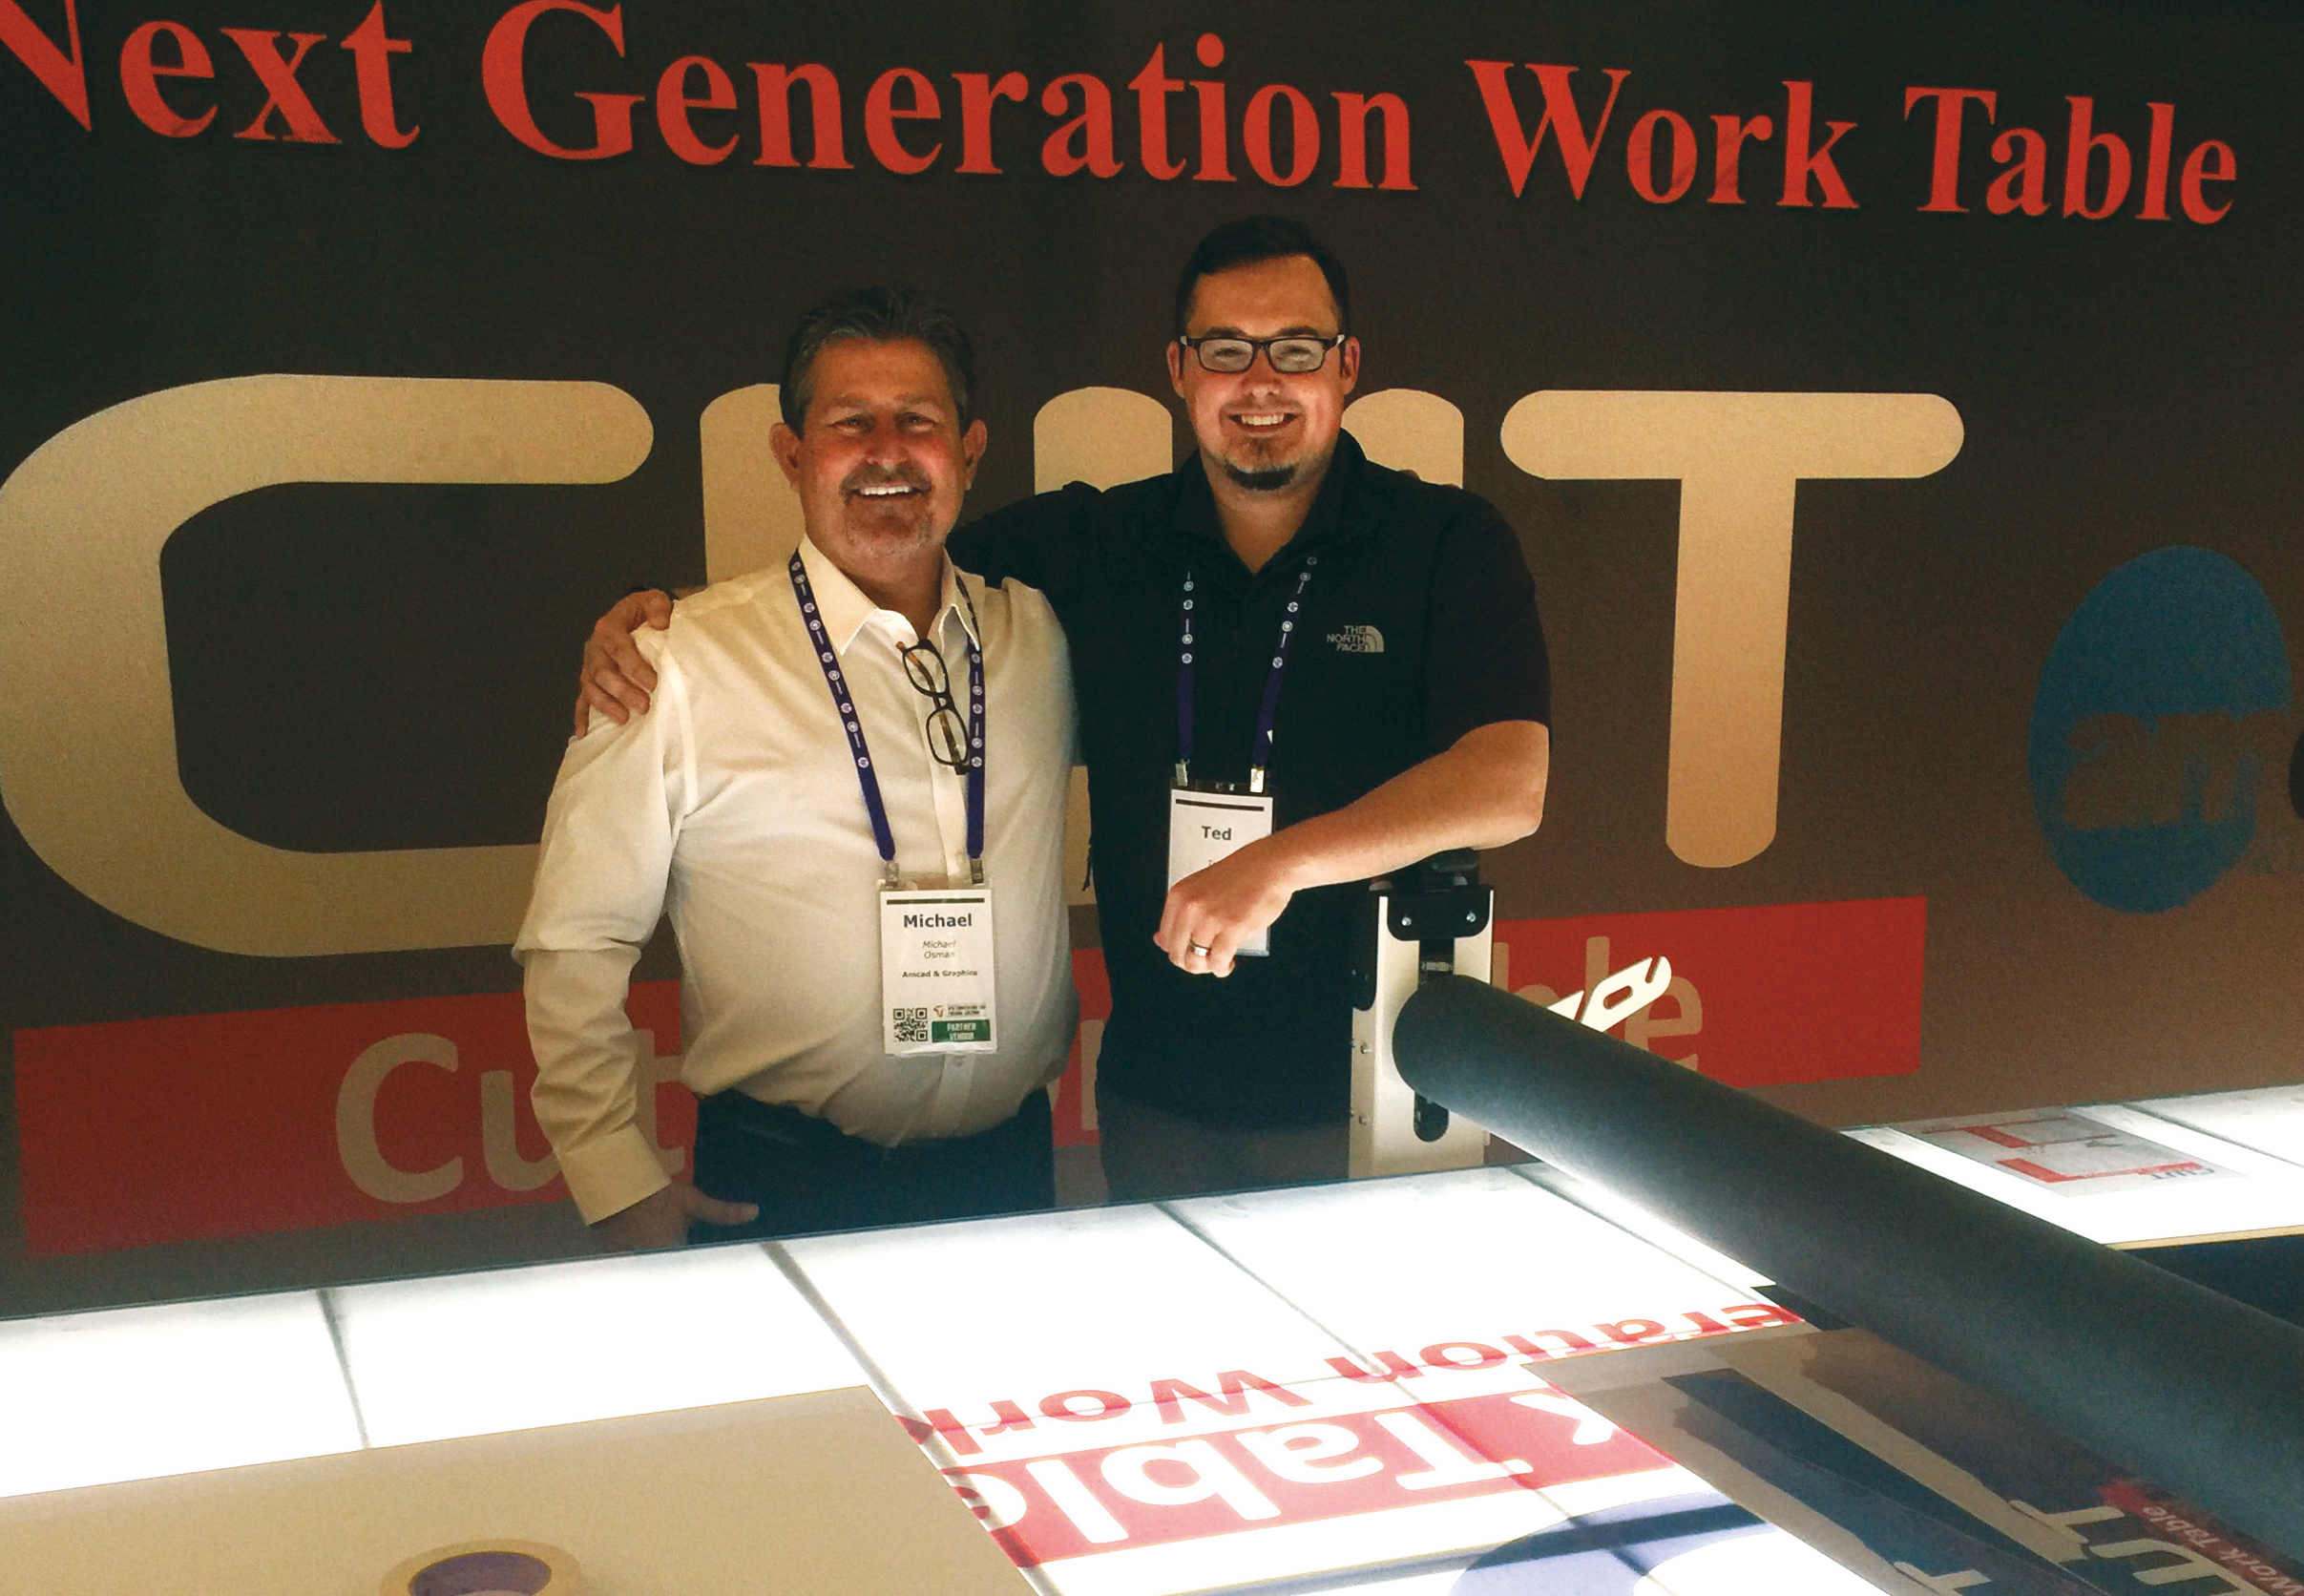 Mike Osman CWT Worktools USA and Ted Redmer Alliance Franchise